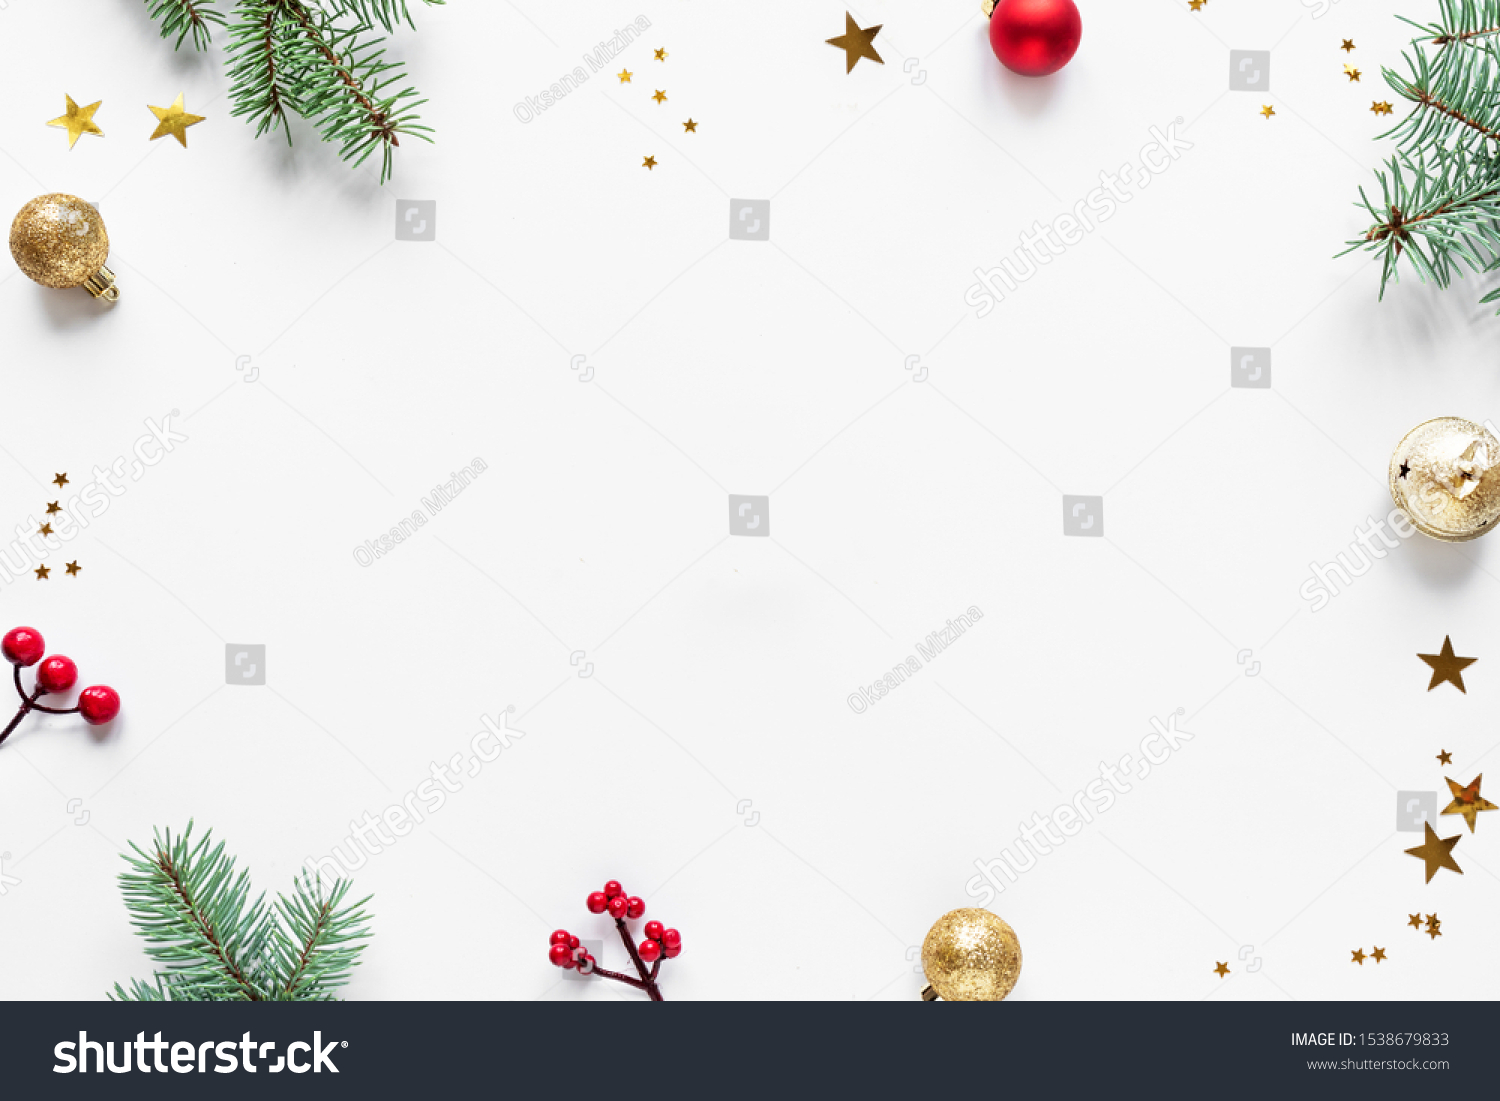 Christmas Background with fir branches, golden and red ornaments and stars, isolated on white background,  copy space. Christmas creative flat lay, concept with festive ornaments. #1538679833